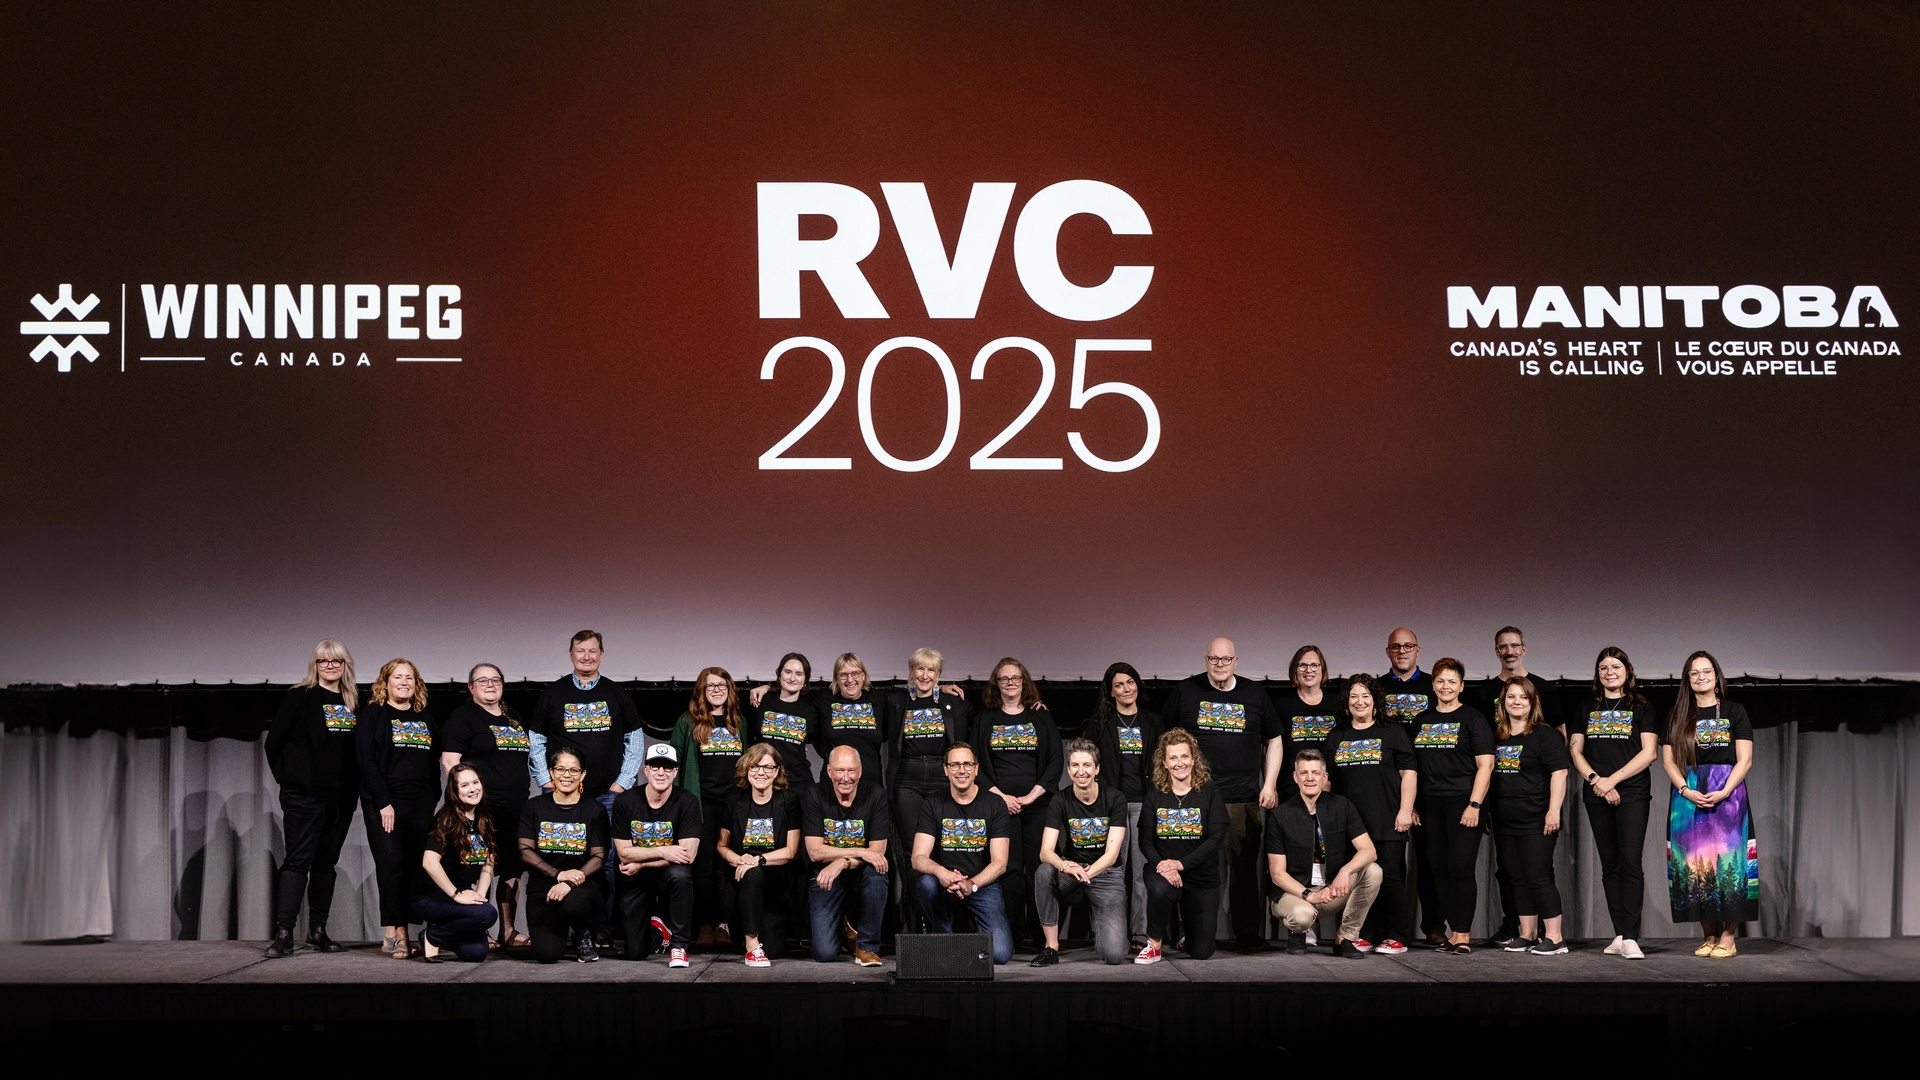 RVC is coming to Winnipeg next year.